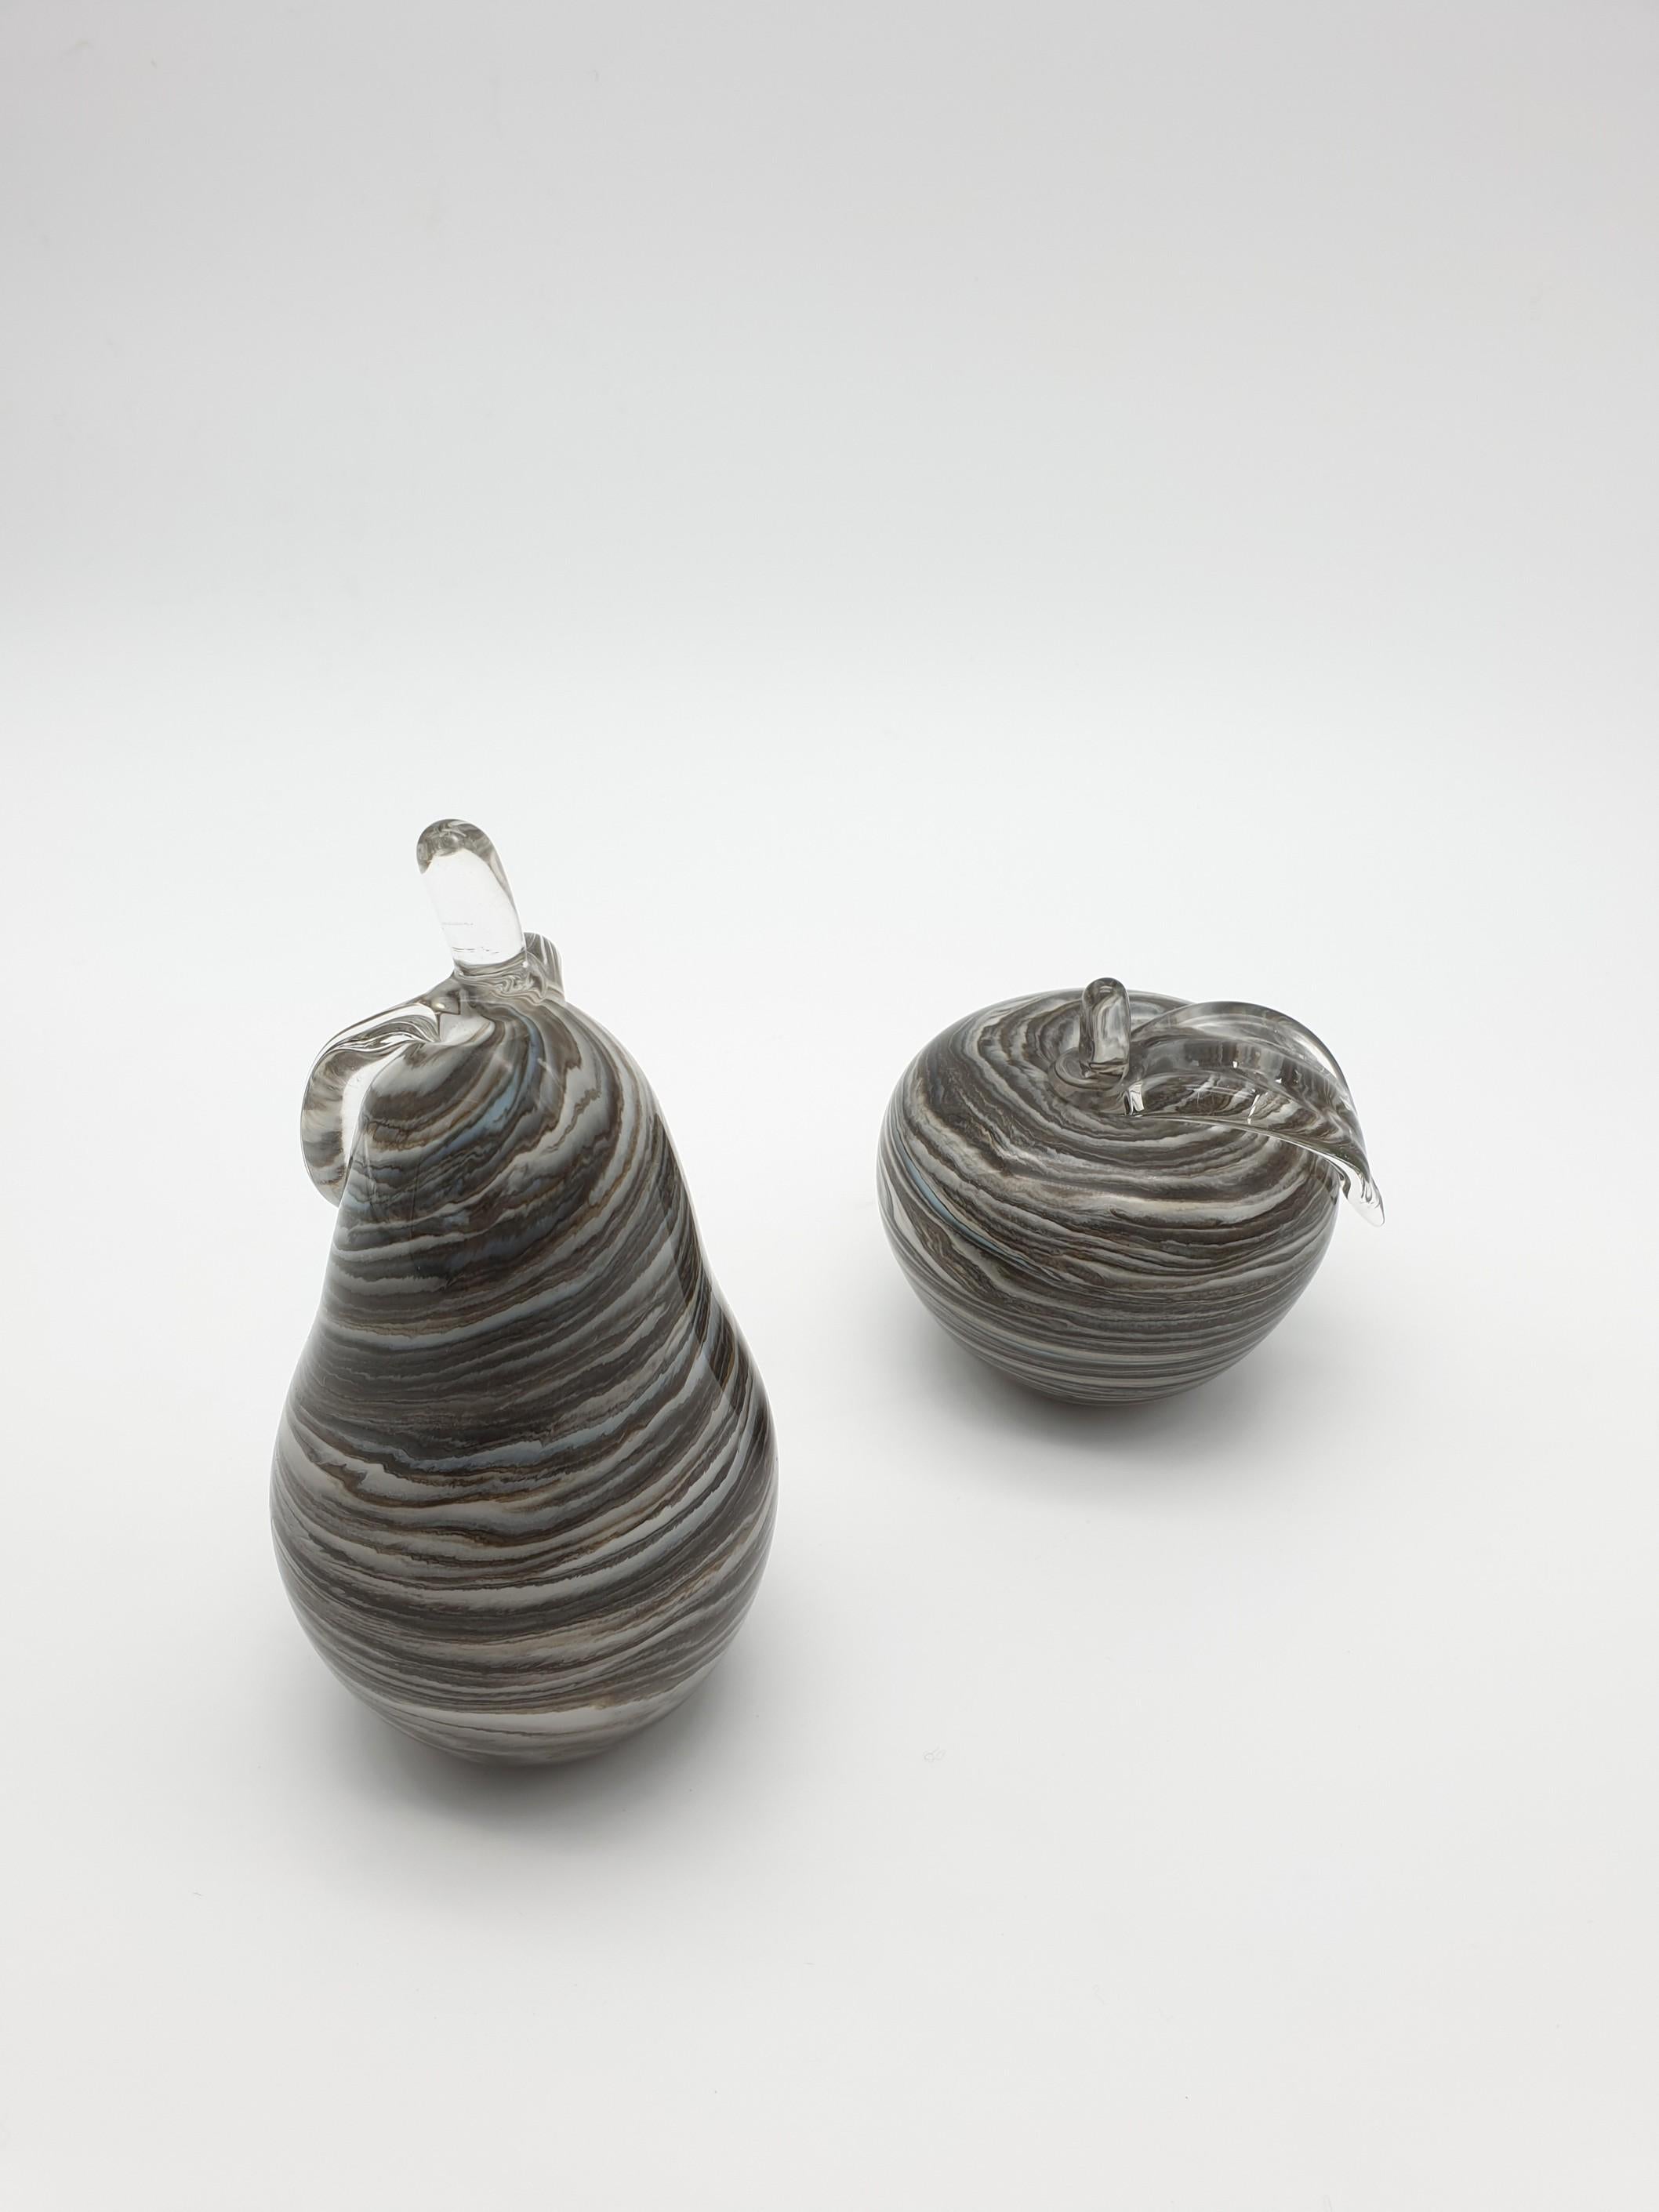 Cool glass apple and pear pair, manufactured by Gino Cenedese e Figlio. These Murano glass ornaments have been handmade by Gino Cenedese e Figlio swirling different shades of color to get cool gray hues in a marbled effect. The apple and pear can